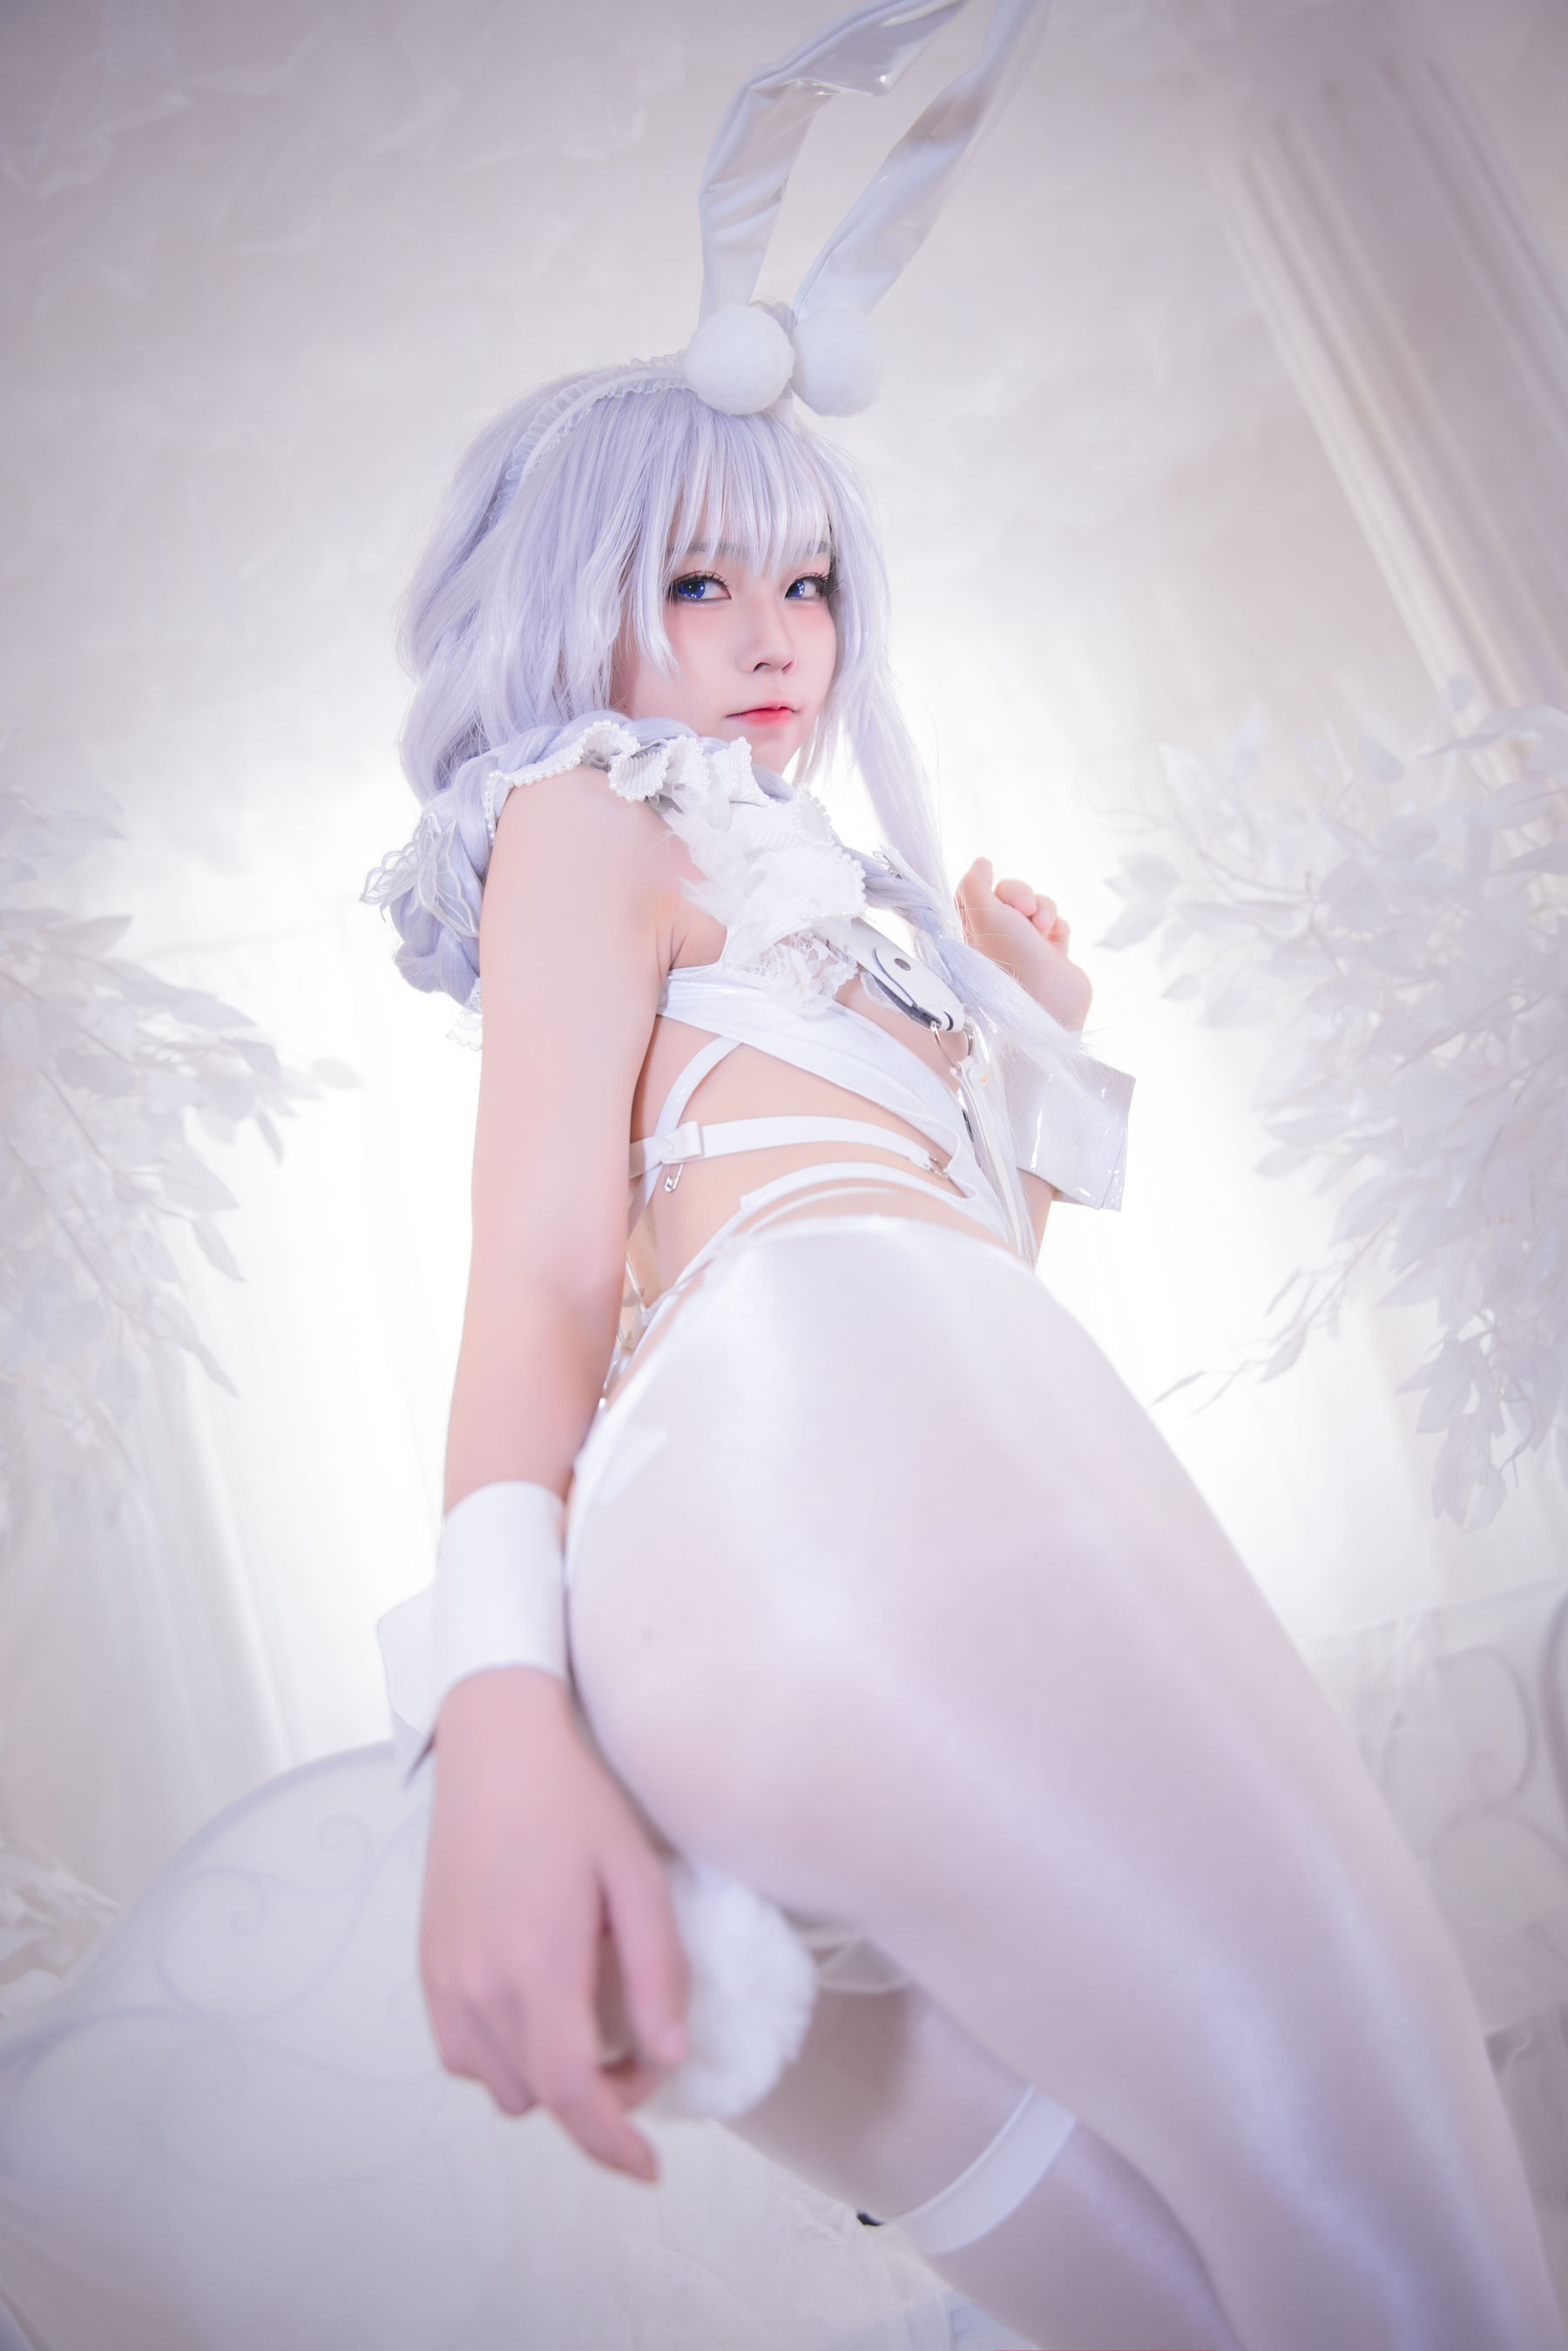 [Net red COSER] Anime blogger G44 will not be injured – vicious